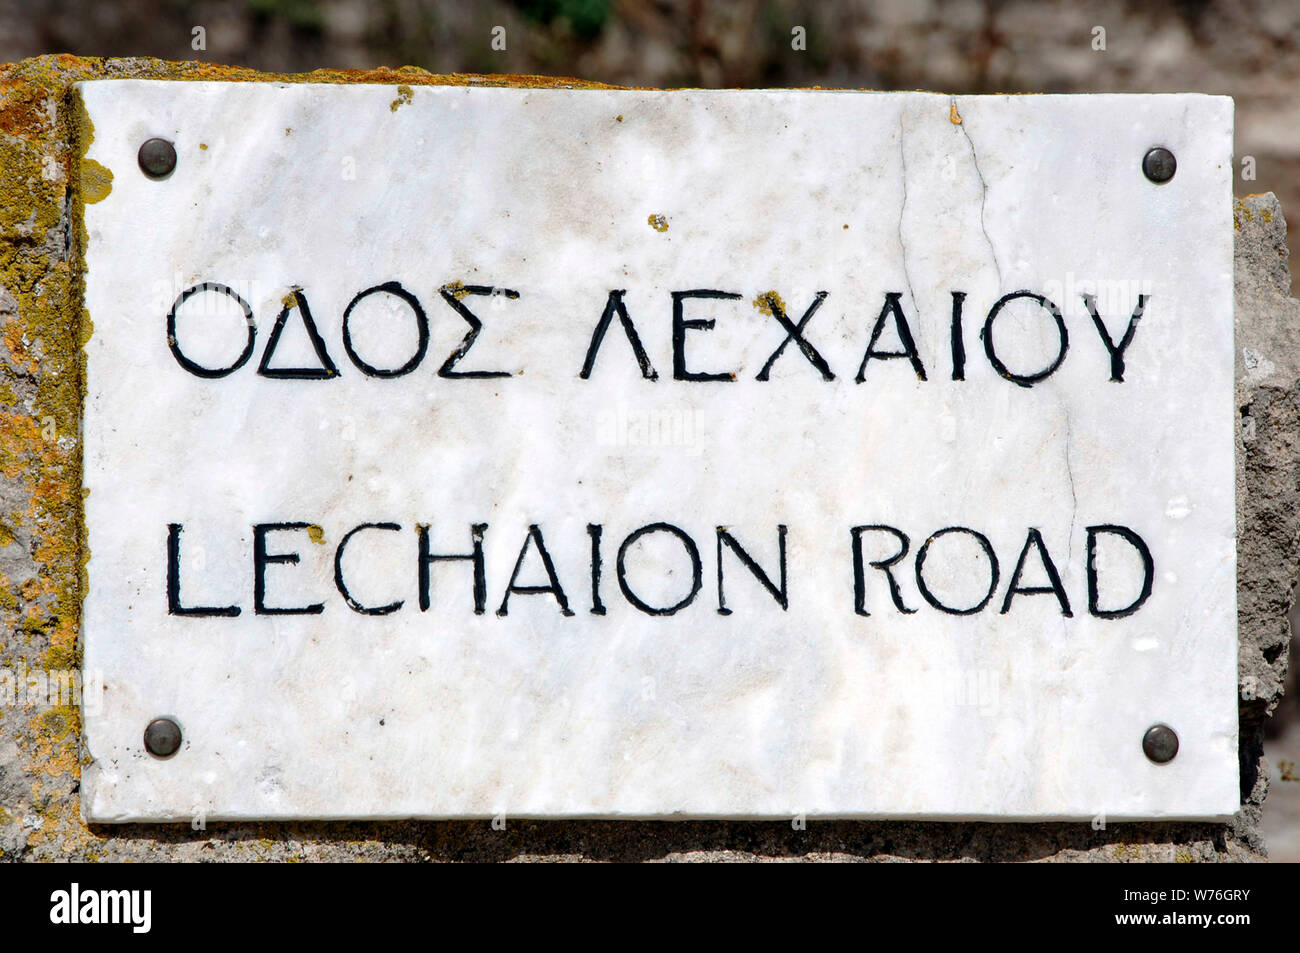 Greece. Ancient Corinth. Bilingual inscription in Greek and English, regarding the Lechaion road. Marble-paved road to the port of Lechaion. Peloponnese. Stock Photo